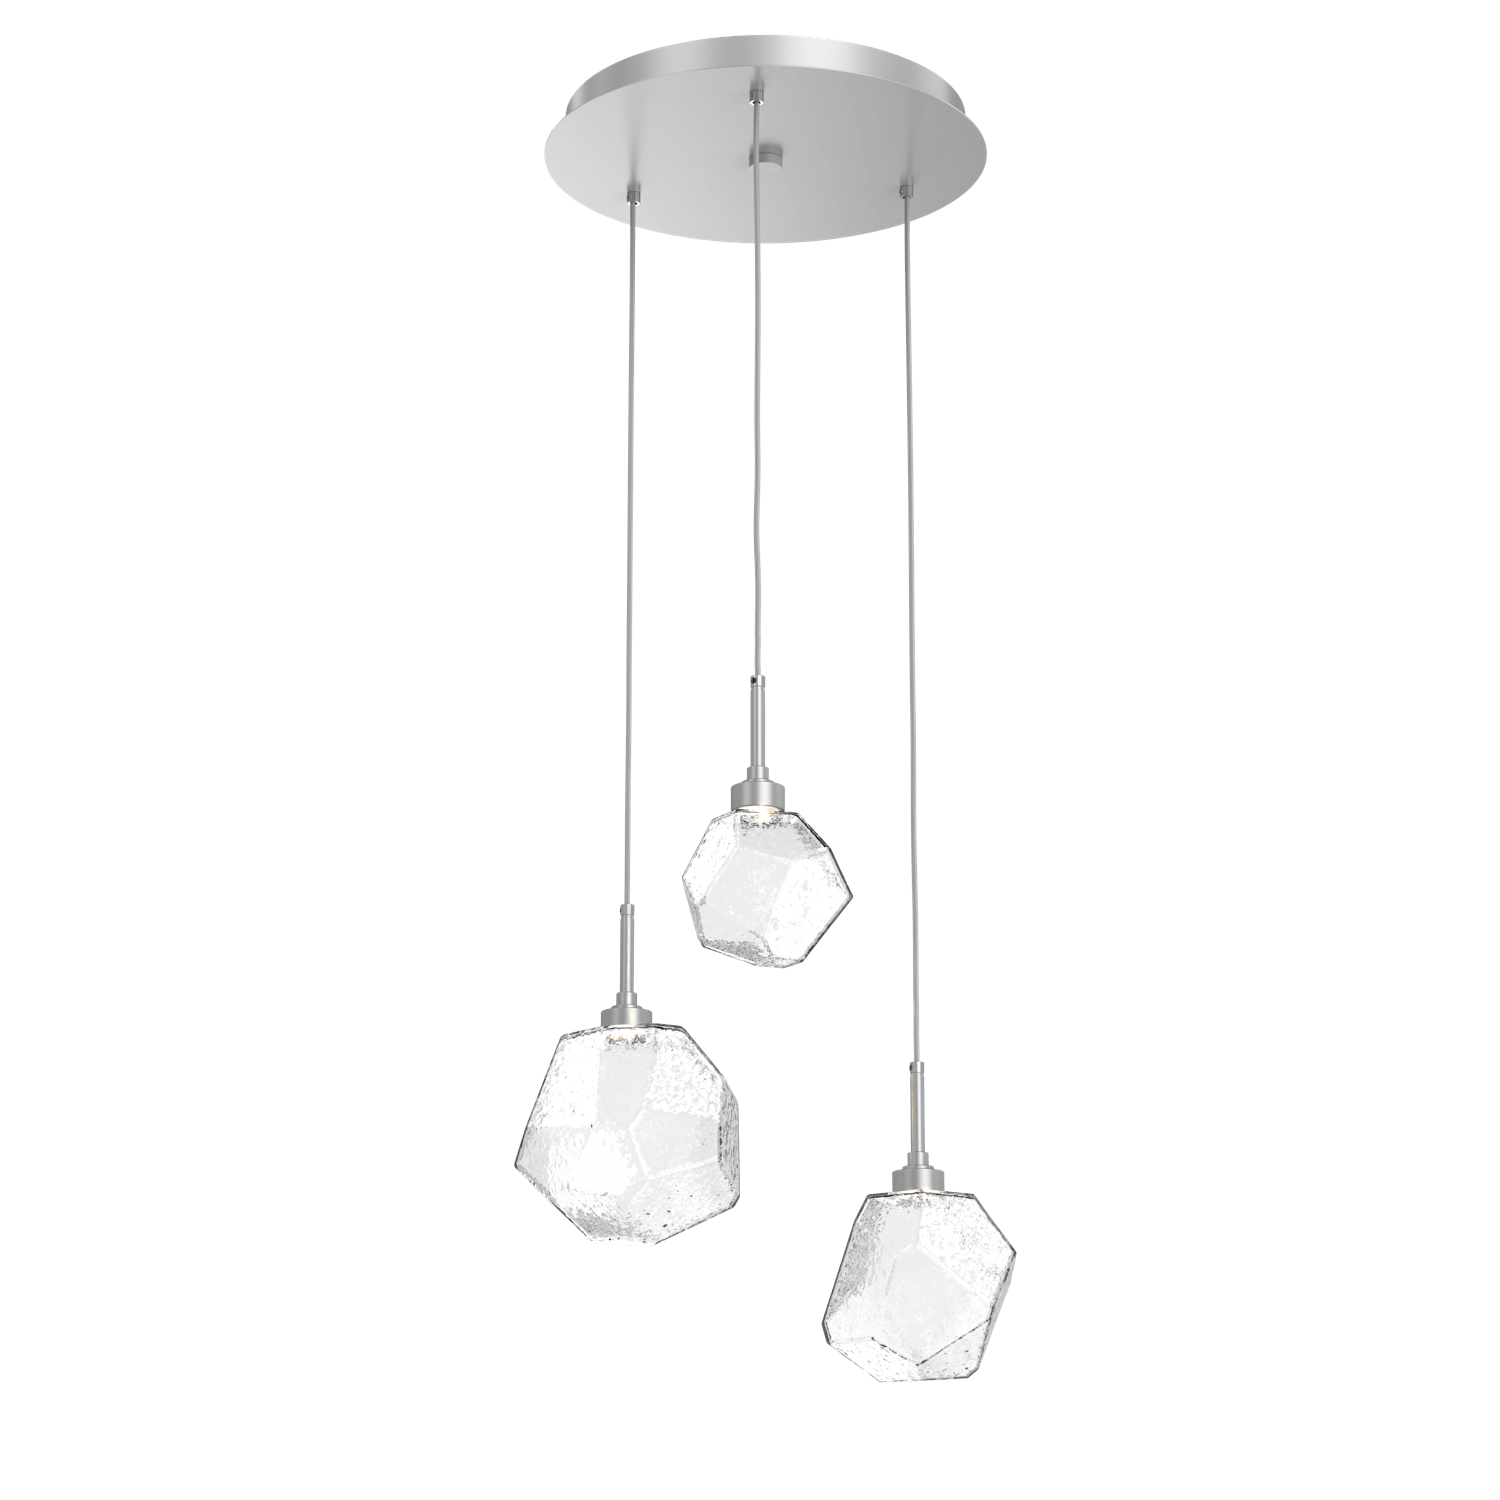 CHB0039-03-CS-C-Hammerton-Studio-Gem-3-light-round-pendant-chandelier-with-classic-silver-finish-and-clear-blown-glass-shades-and-LED-lamping